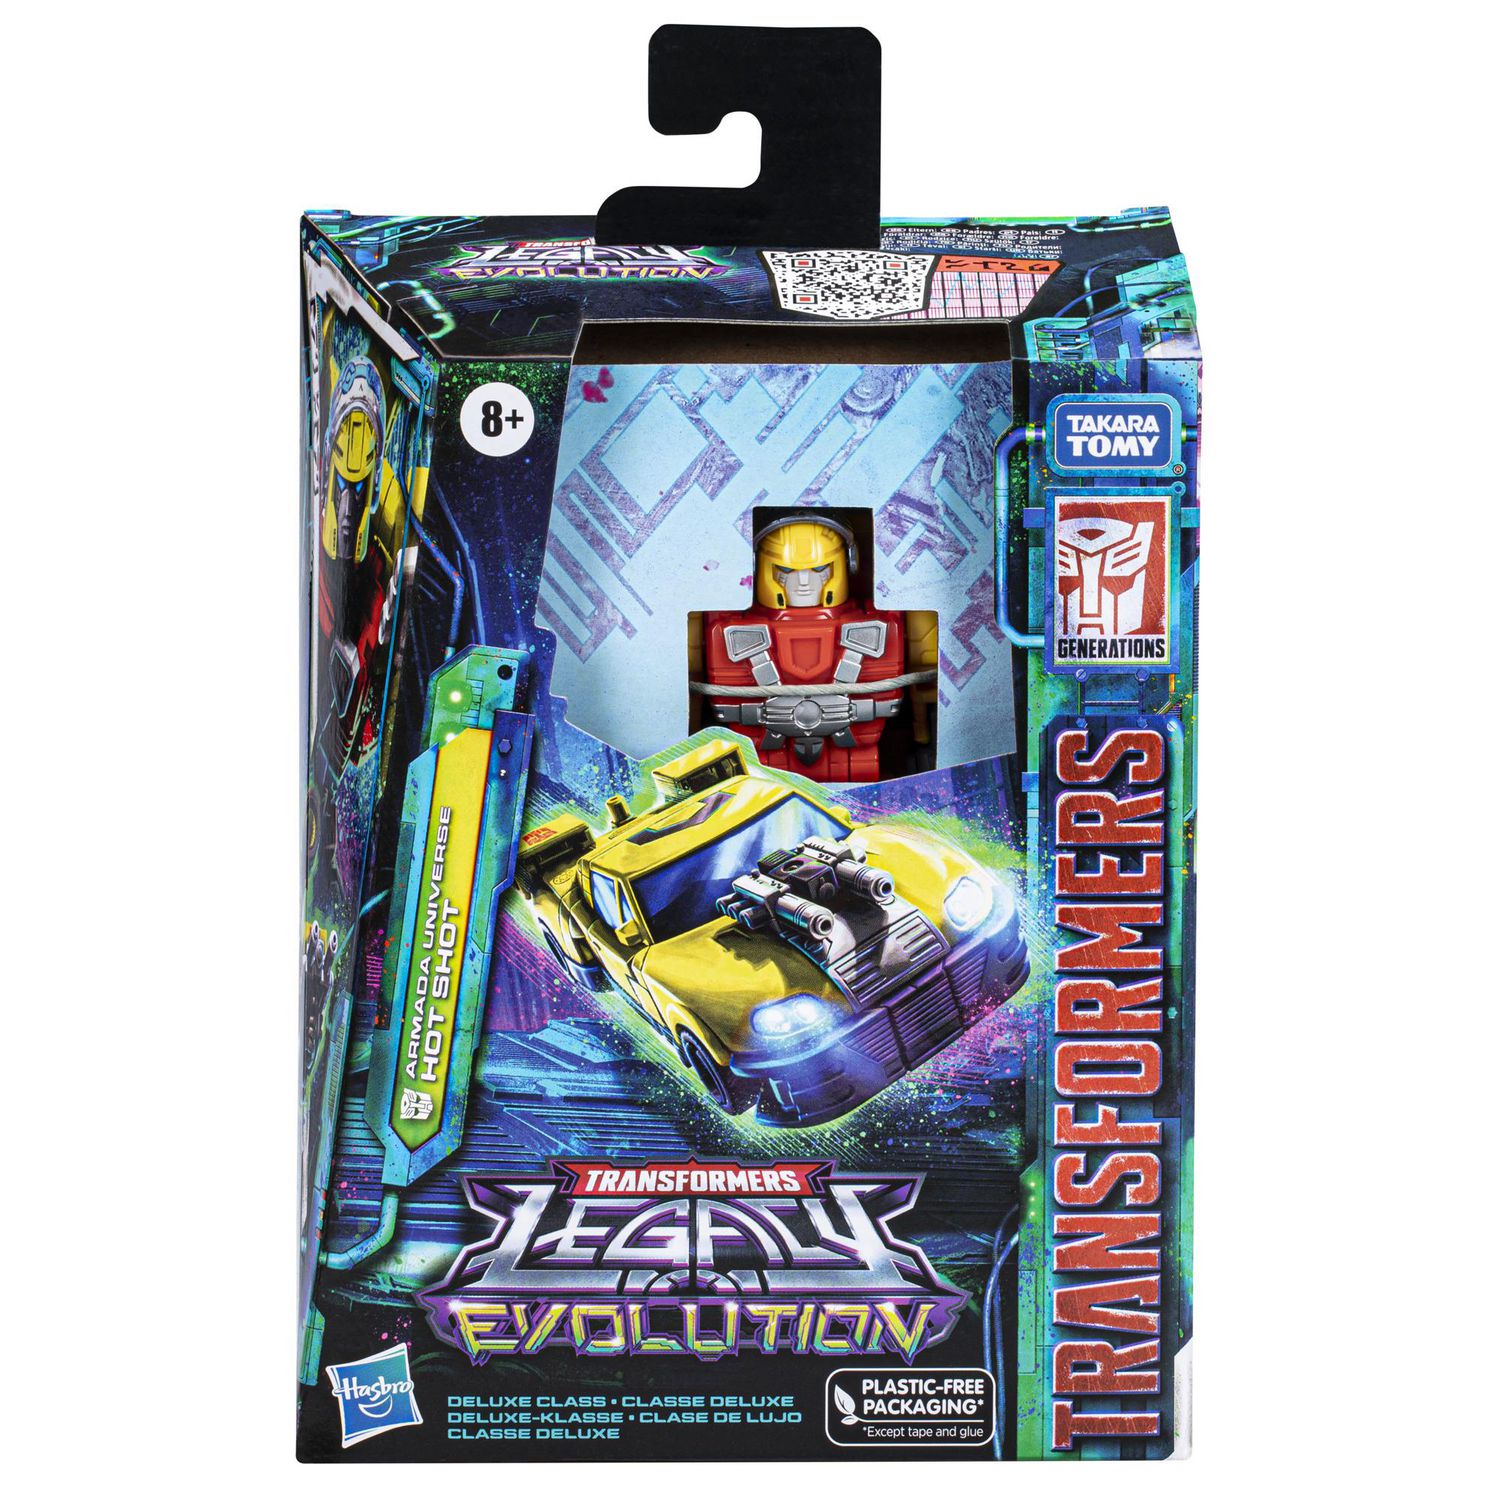 Transformers Toys Legacy Evolution Deluxe Armada Universe Hot Shot